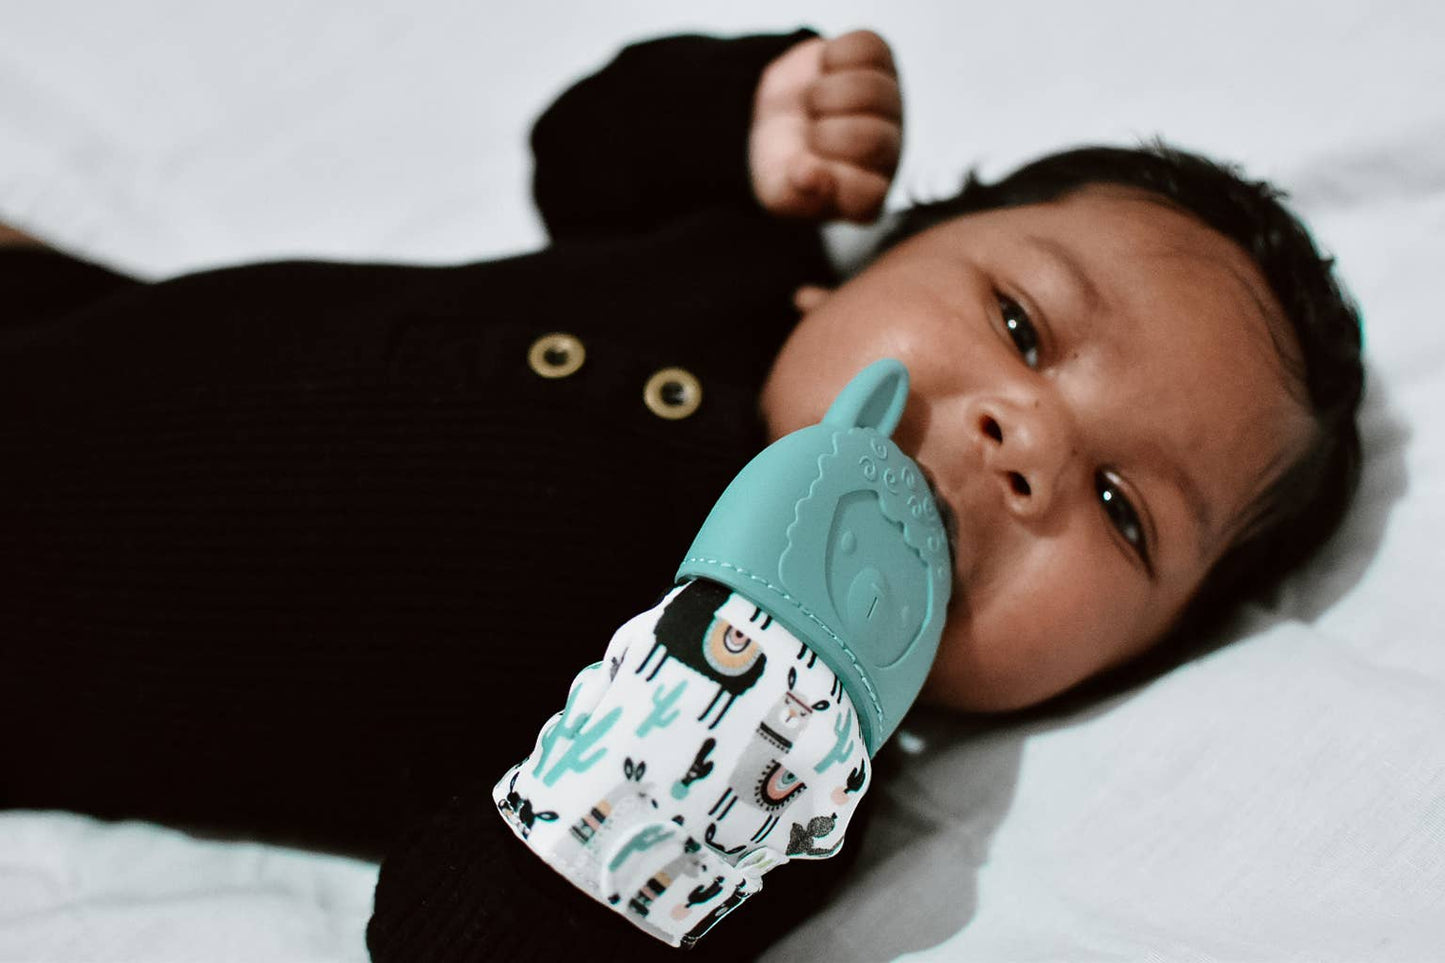 Itzy Mitt™ Silicone Teething Mitts: Sun